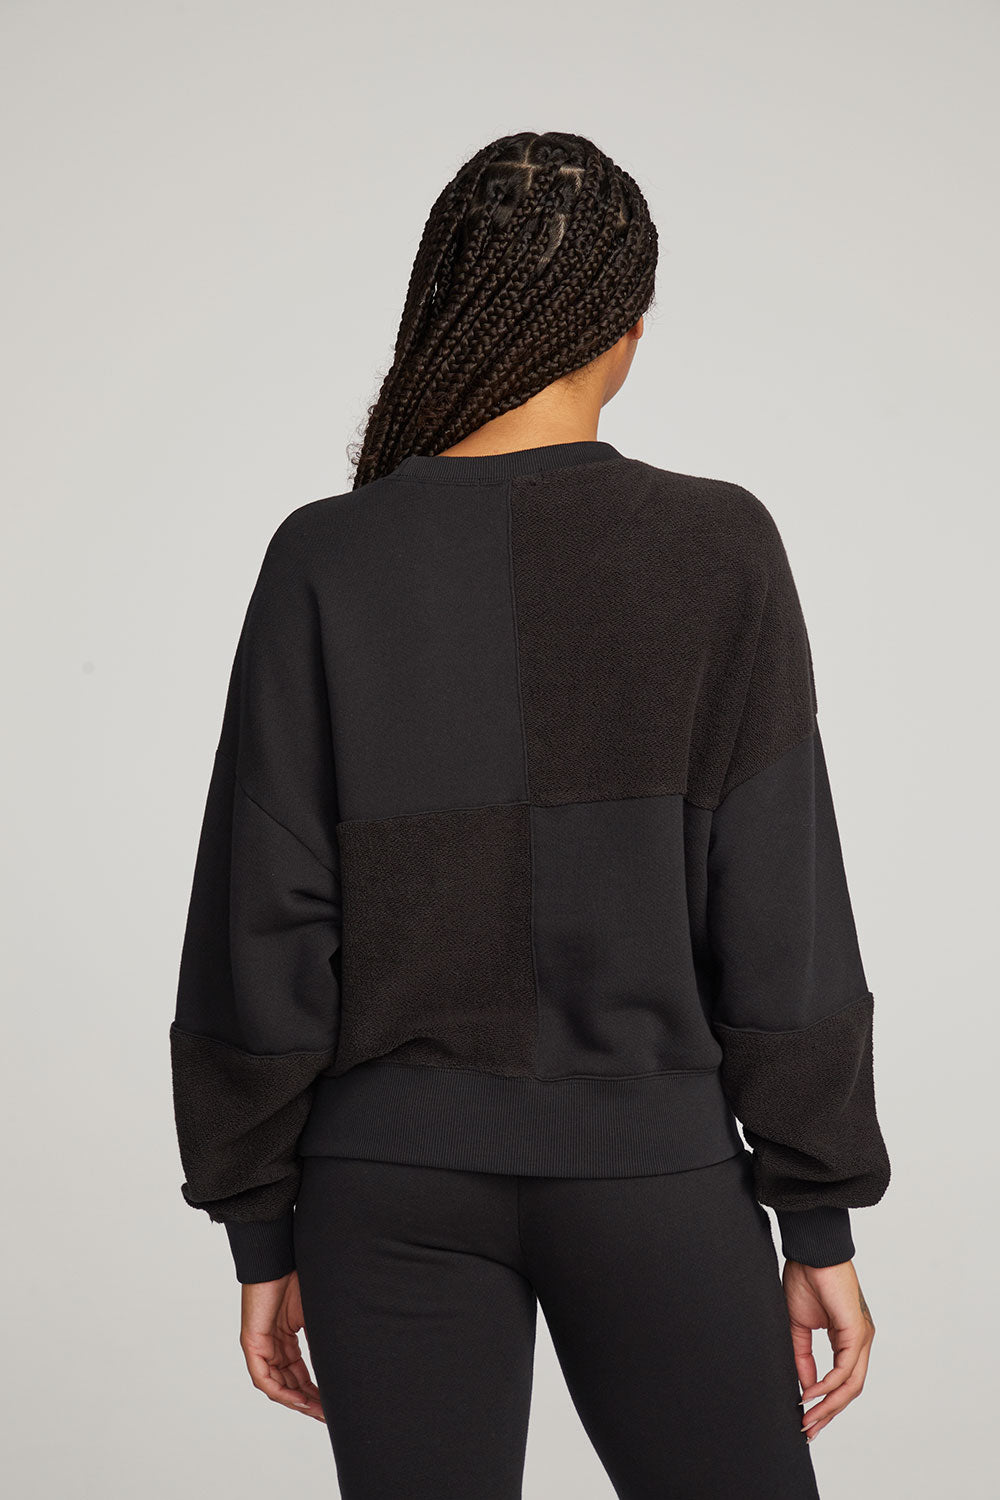 Marie Licorice Pullover WOMENS chaserbrand